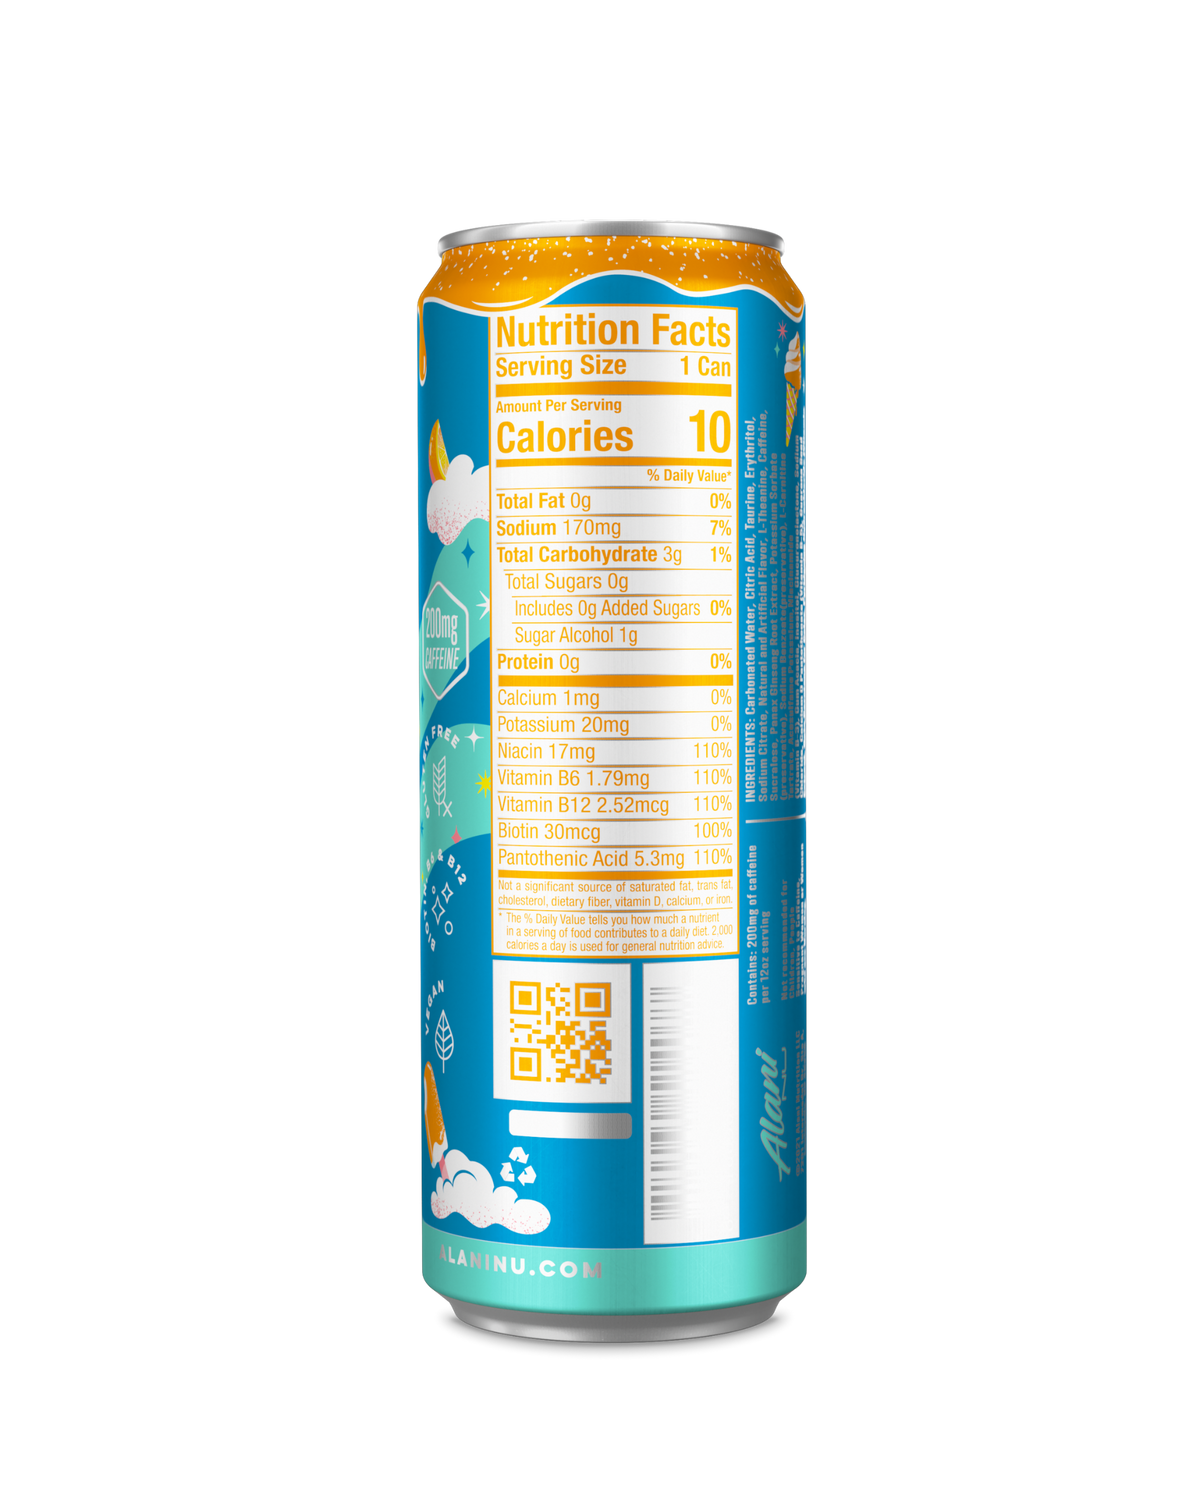 A back view of energy drink in Dream Float flavor highlighting nutrition facts.